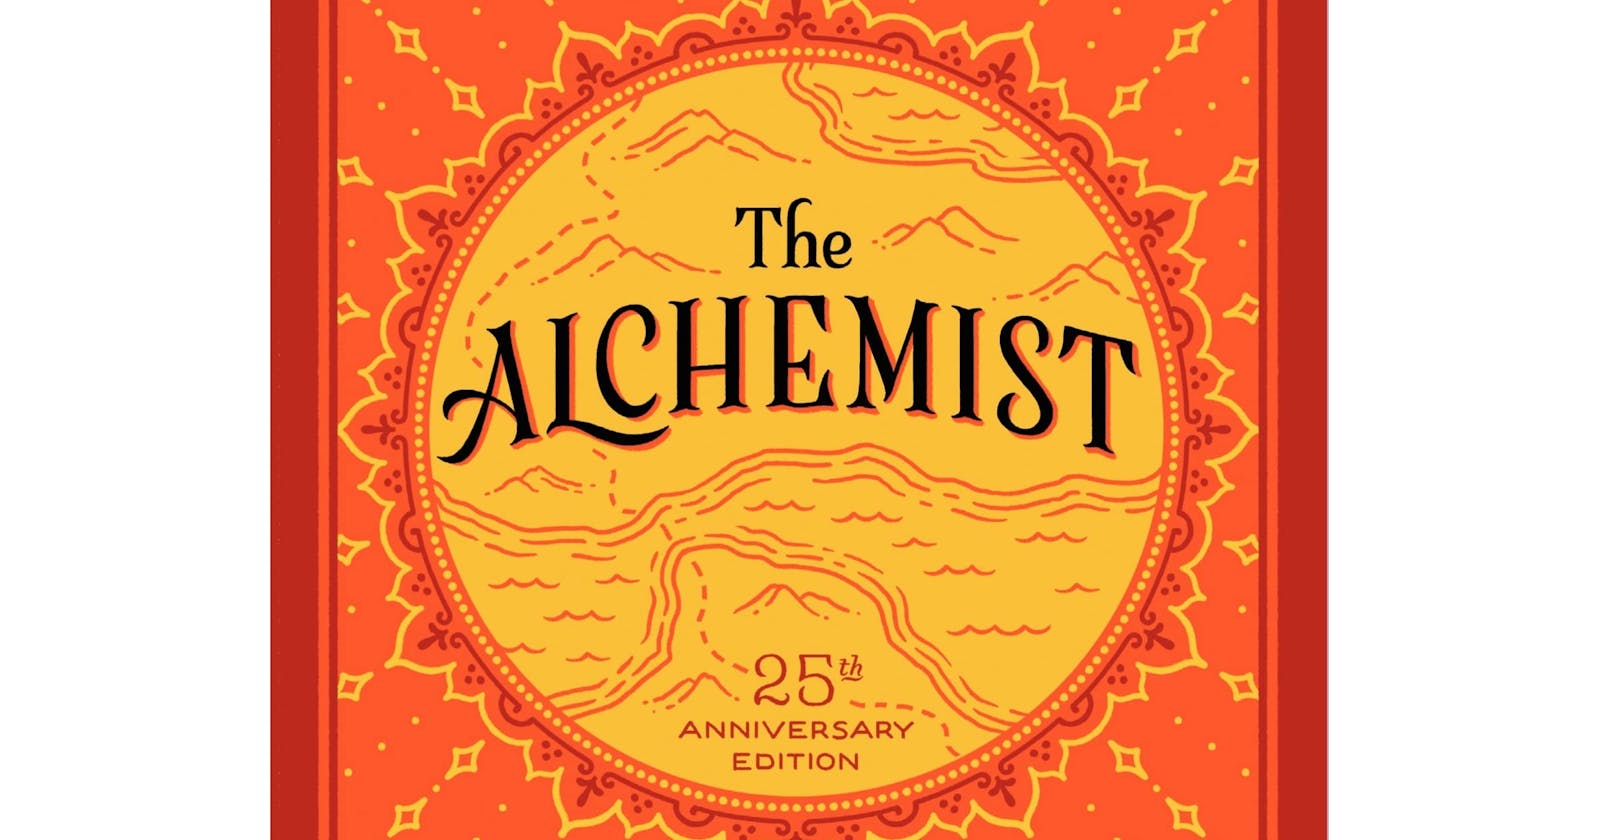 Powerful Life Lessons from The Alchemist